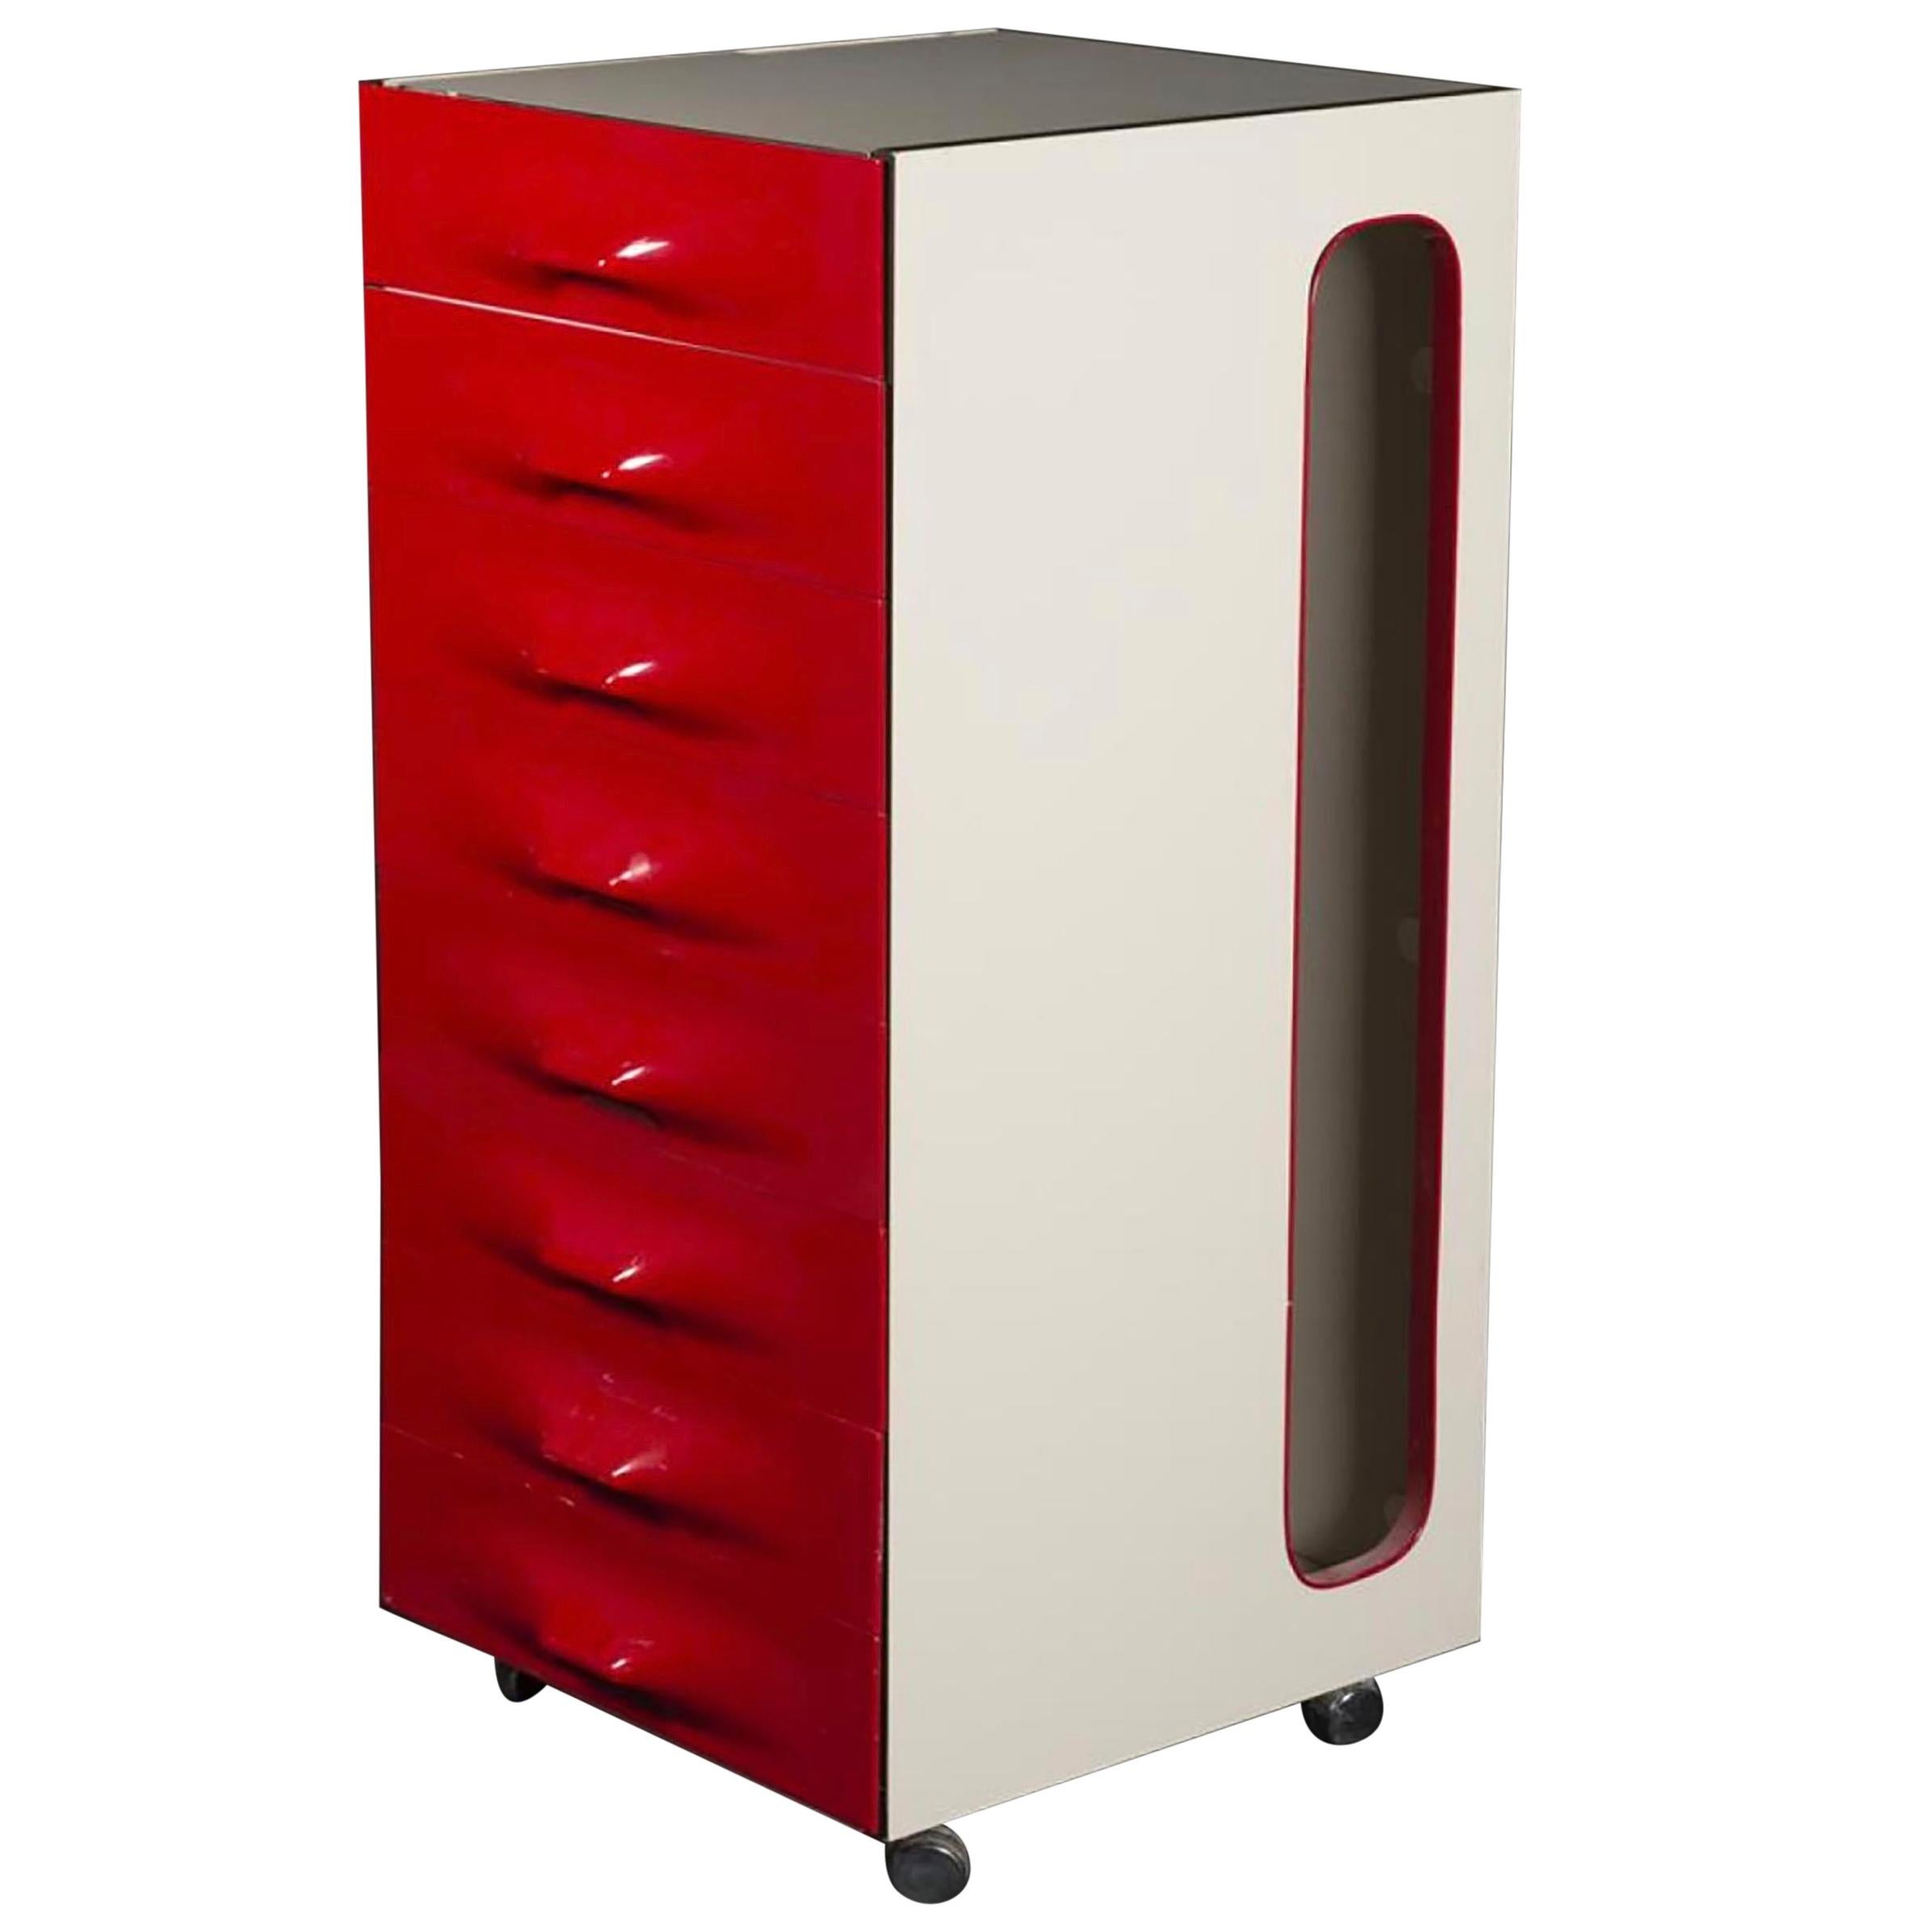 Raymond Loewy
For the IEC (Industrial esthetics company)
Mobile storage unit forming a dressing table and closet
Eight fronts in red moulded plastic and white melamine
Edition Dubinsky brothers,
circa 1973
Measures: H 106 x W 51 x D 51
25